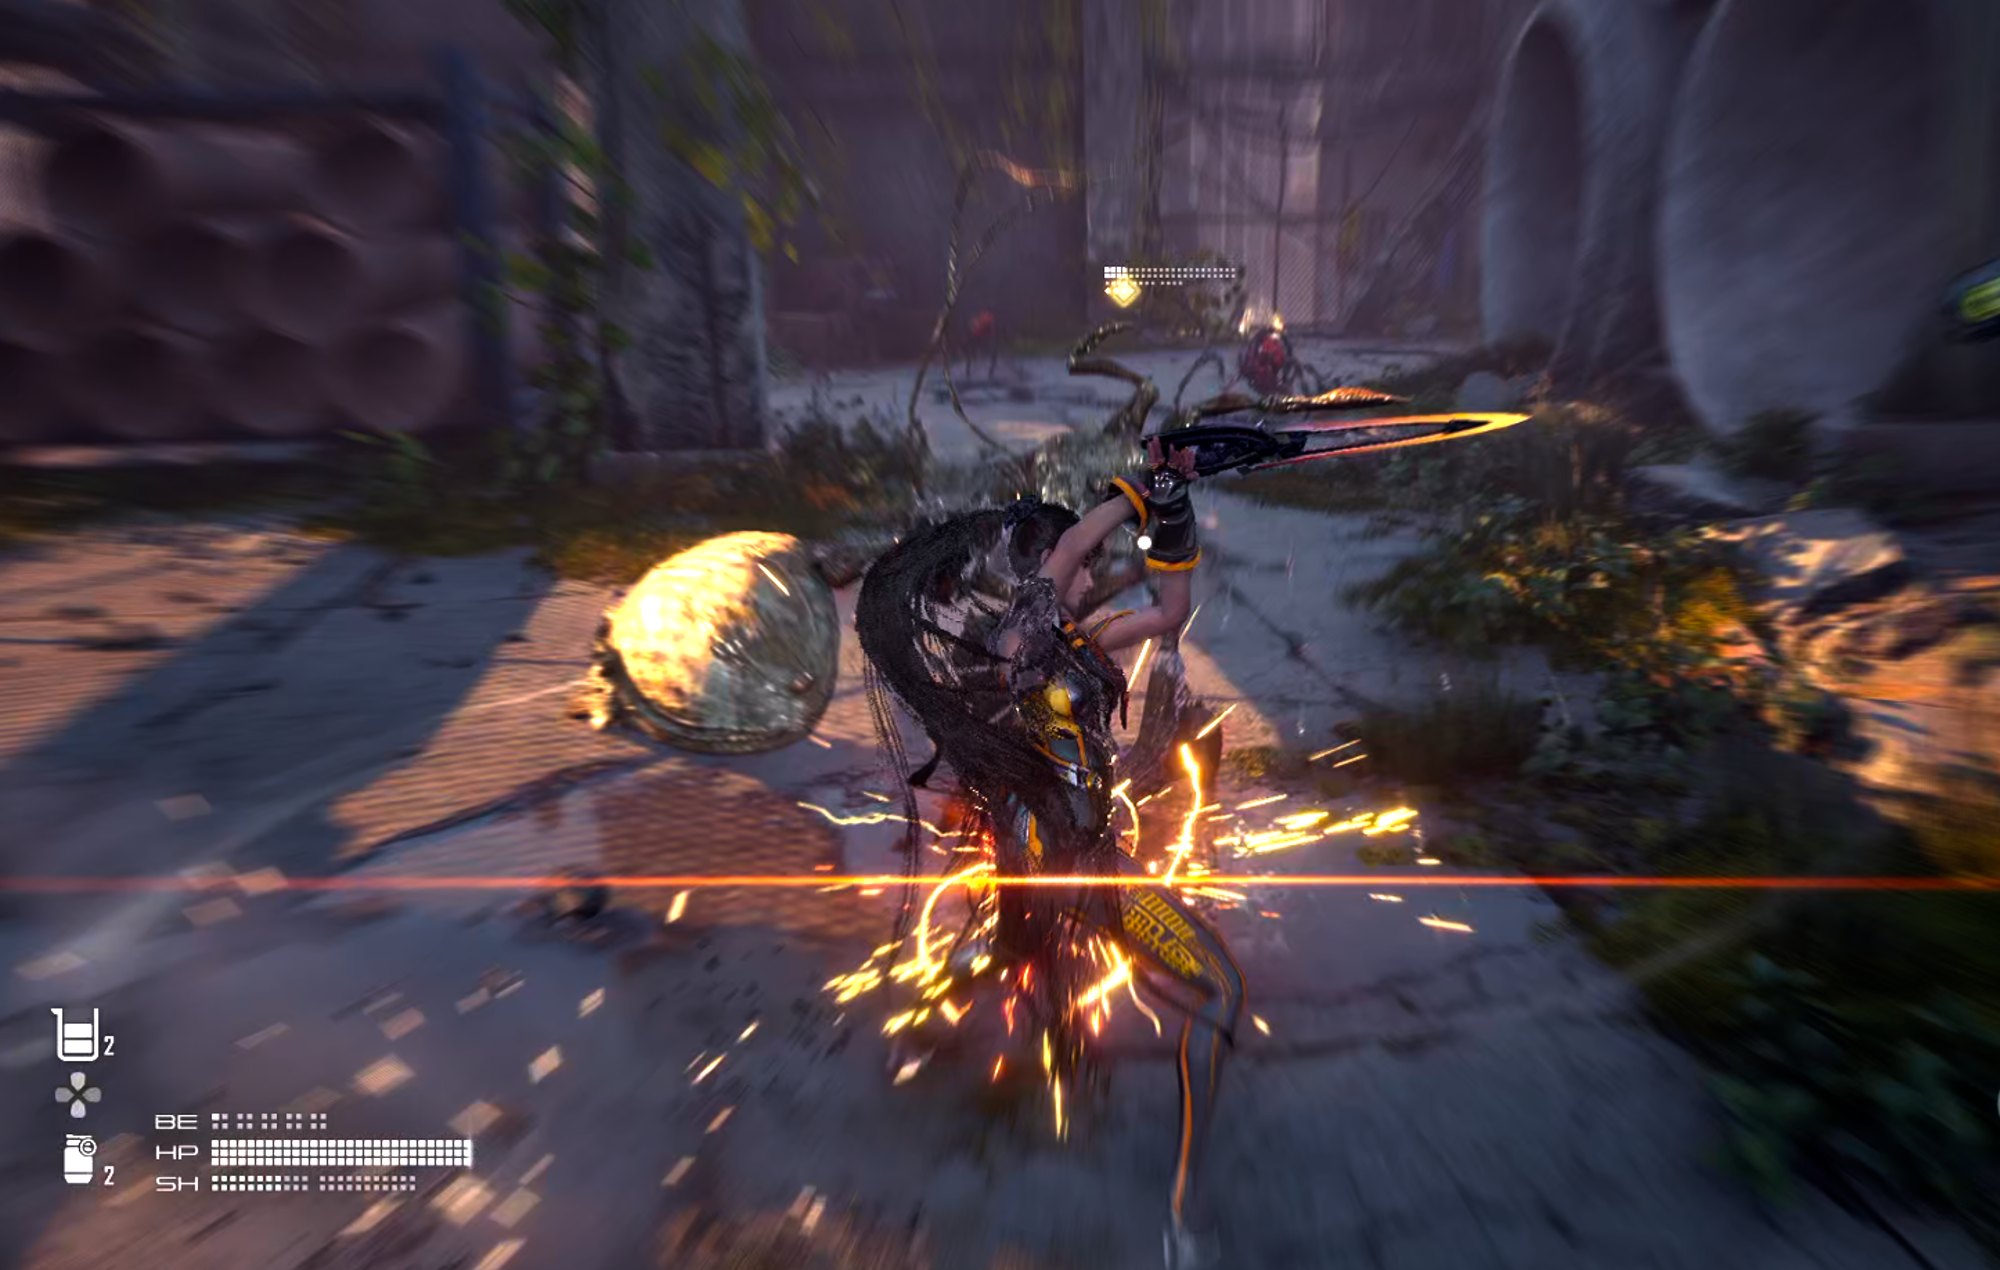 Stellar Blade Best Skills: Eve can be seen parrying an enemy